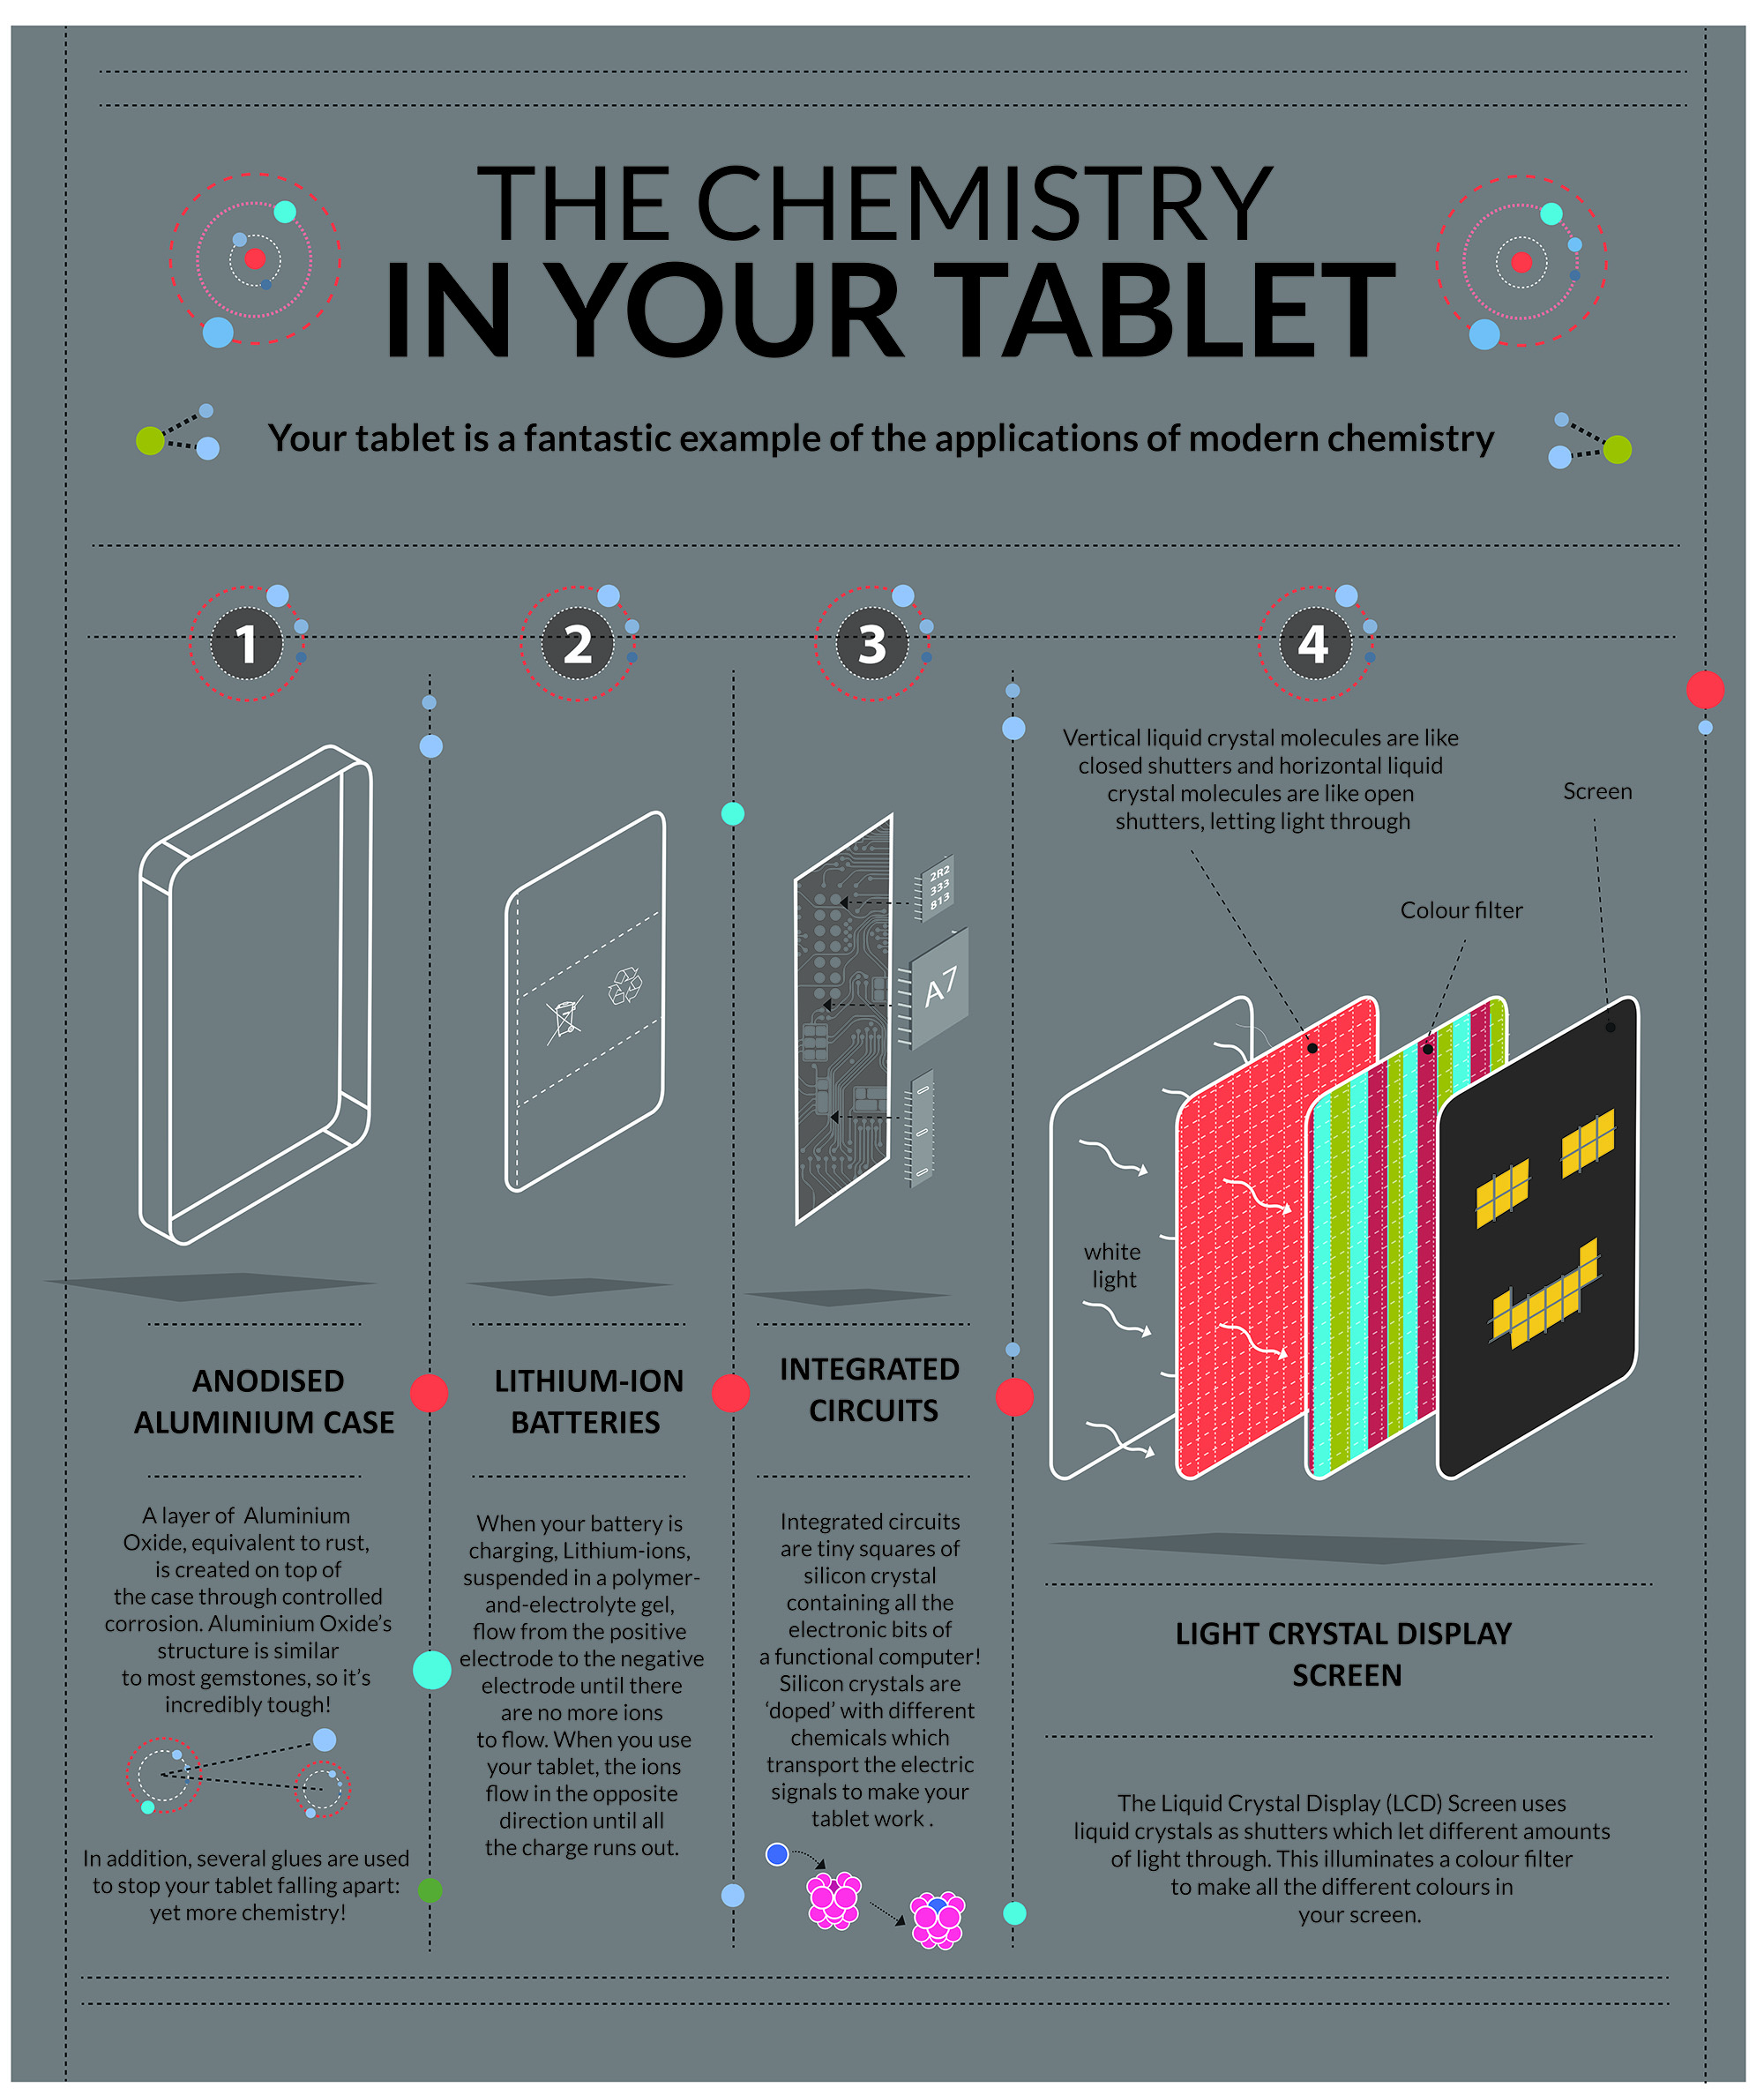 The chemistry in your tablet